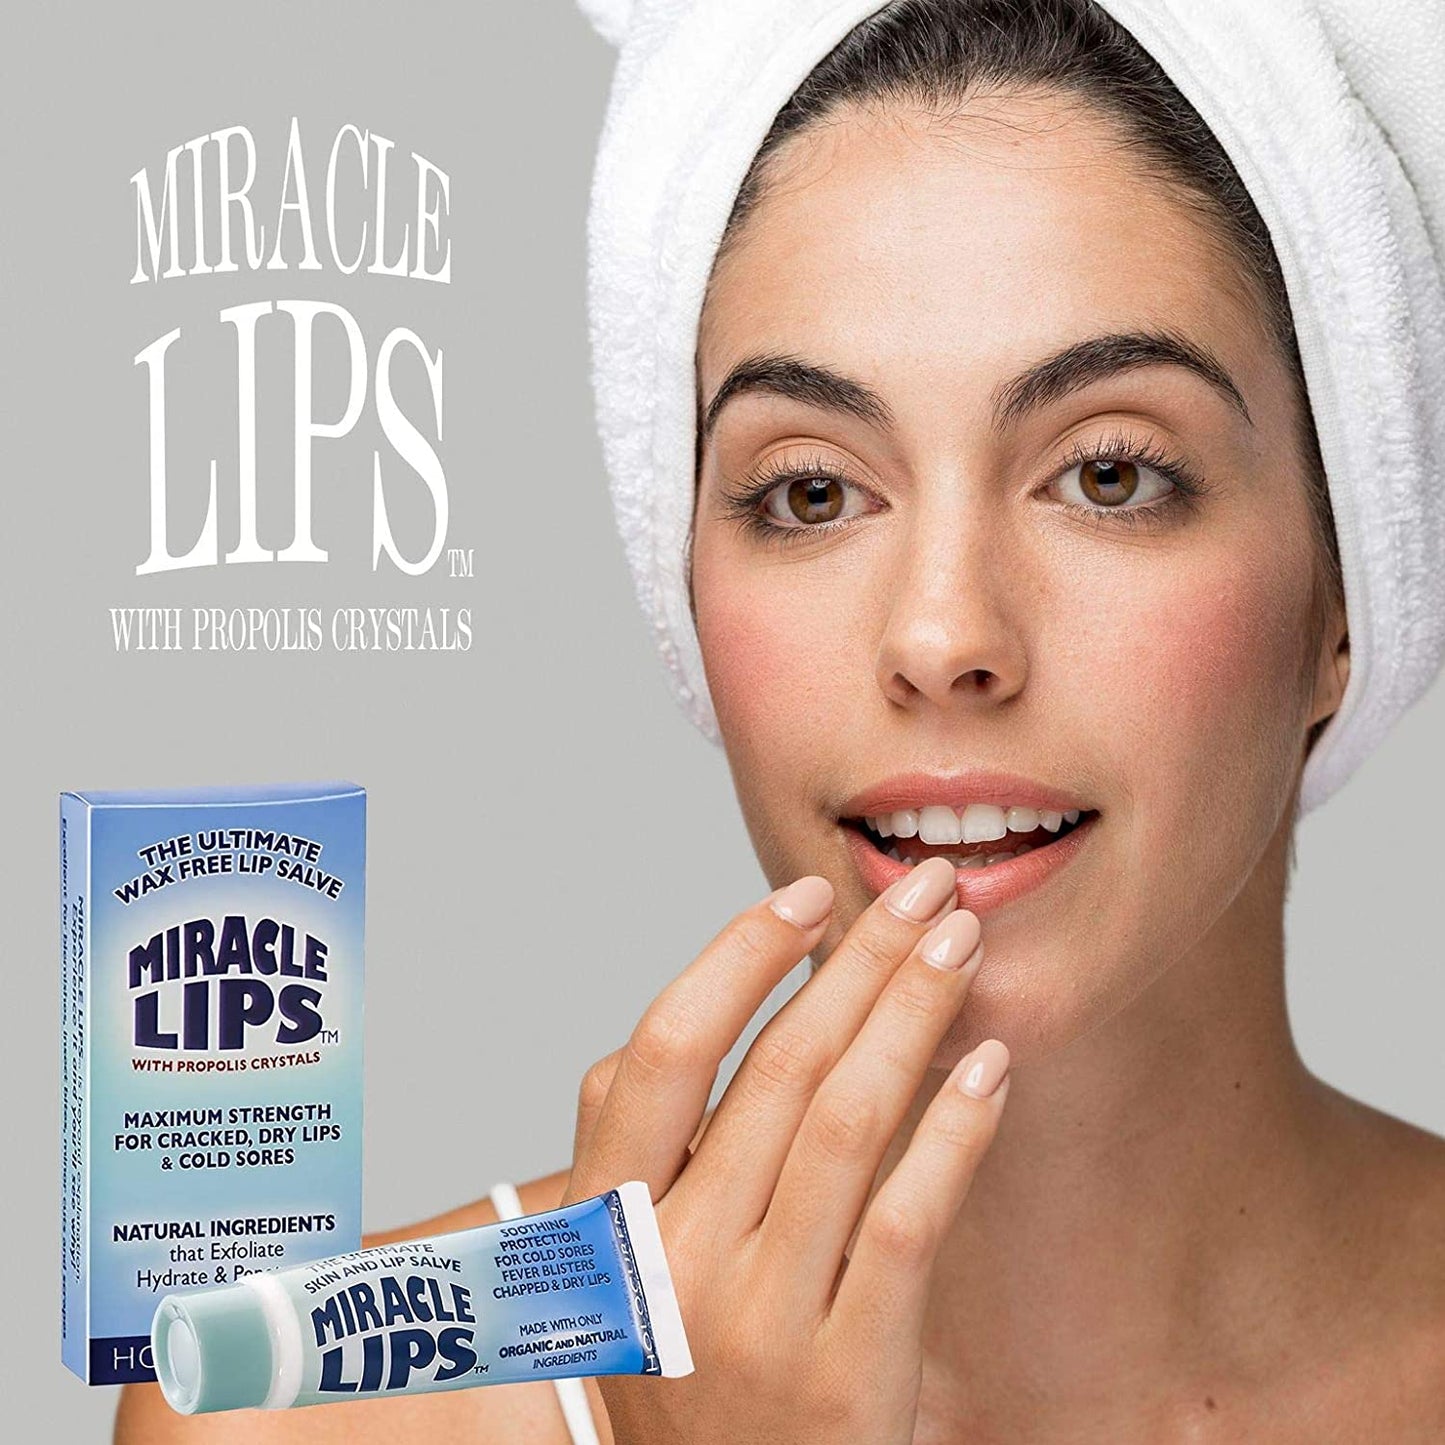 Miracle Lips Salve for Dry, Cracked, Sunburned Lips & Cold Sores - HOLOCUREN - Official Website